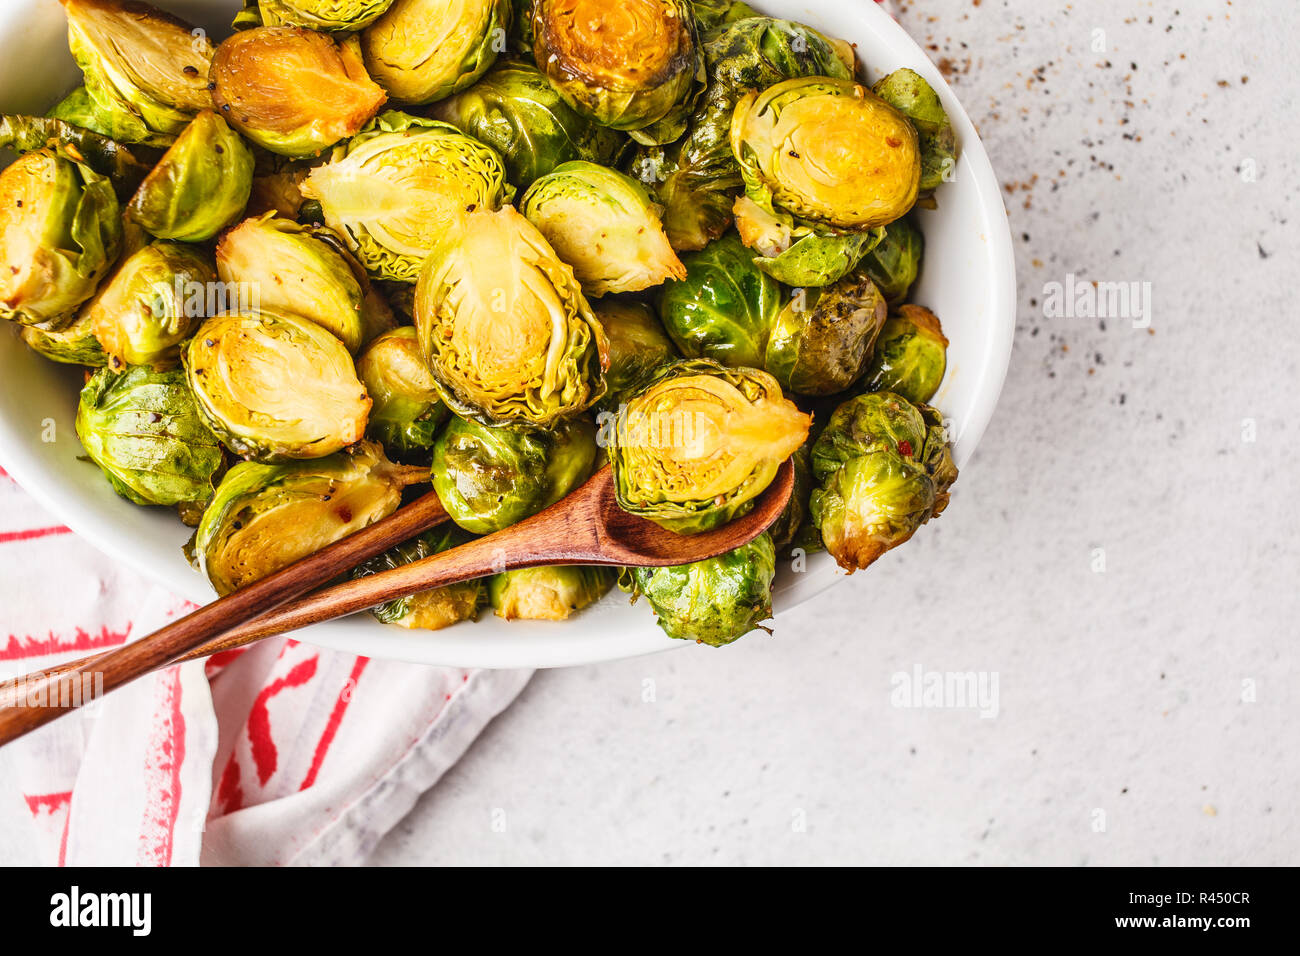 Baked brussels sprouts on a white plate. Plant based diet concept. Stock Photo